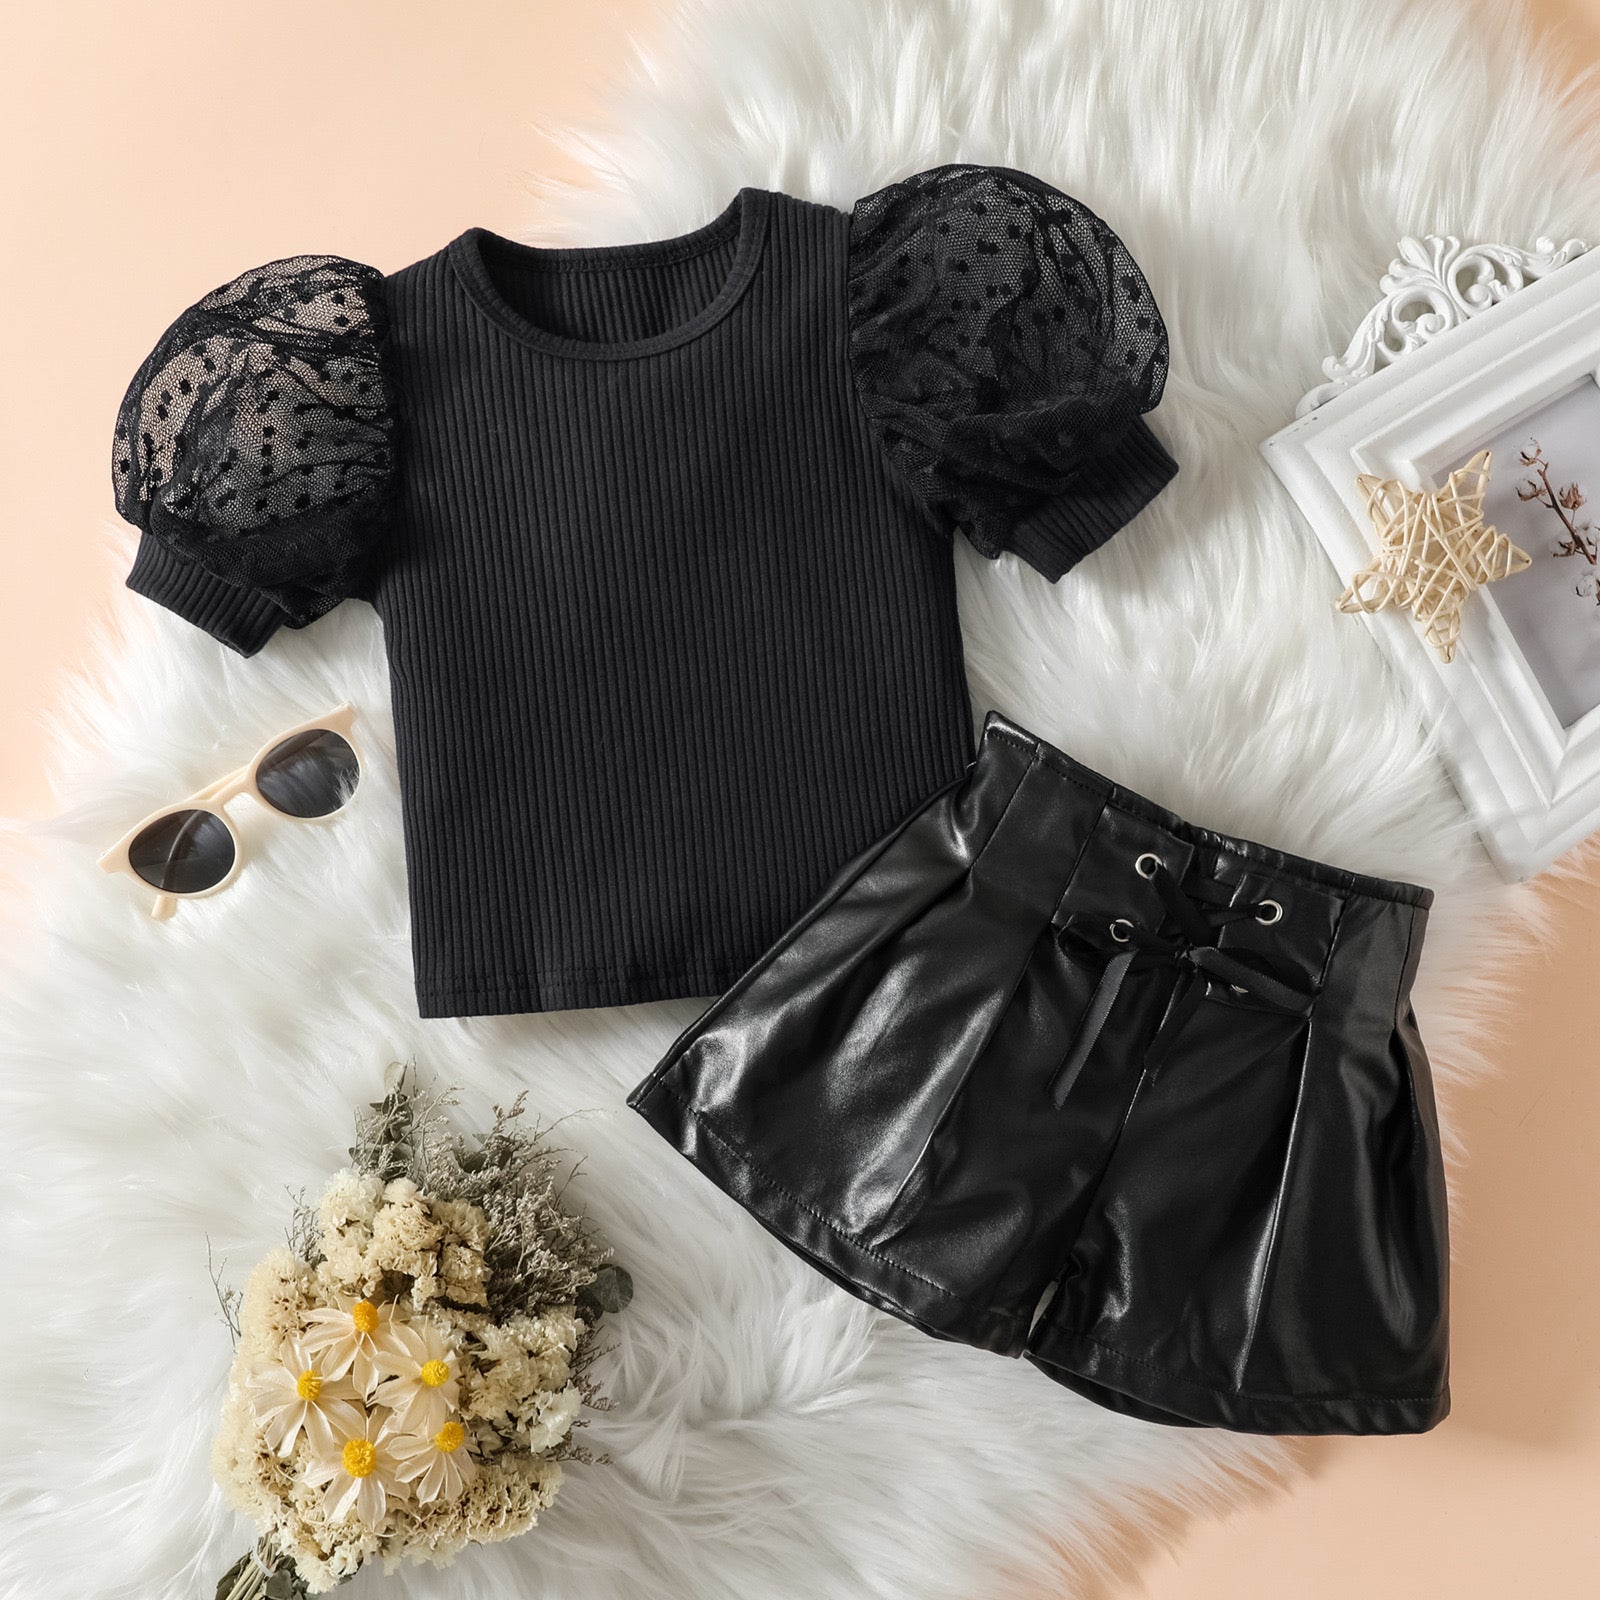 Girls Top & Faux Leather Shorts Set